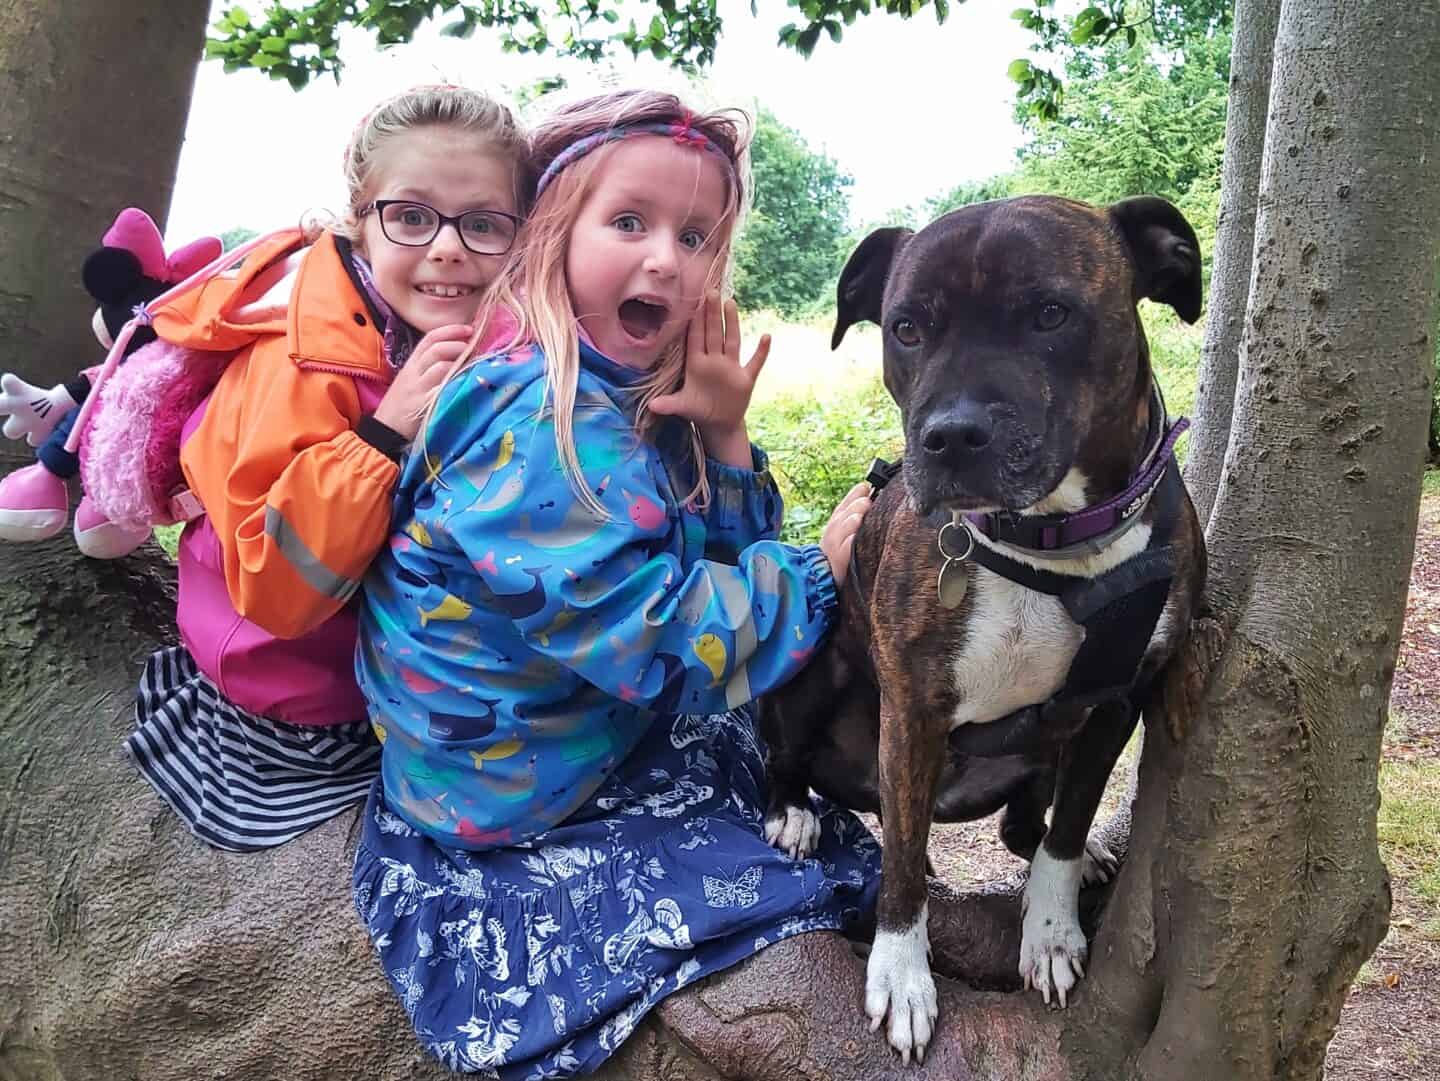 Two children and a dog sitting in a tree